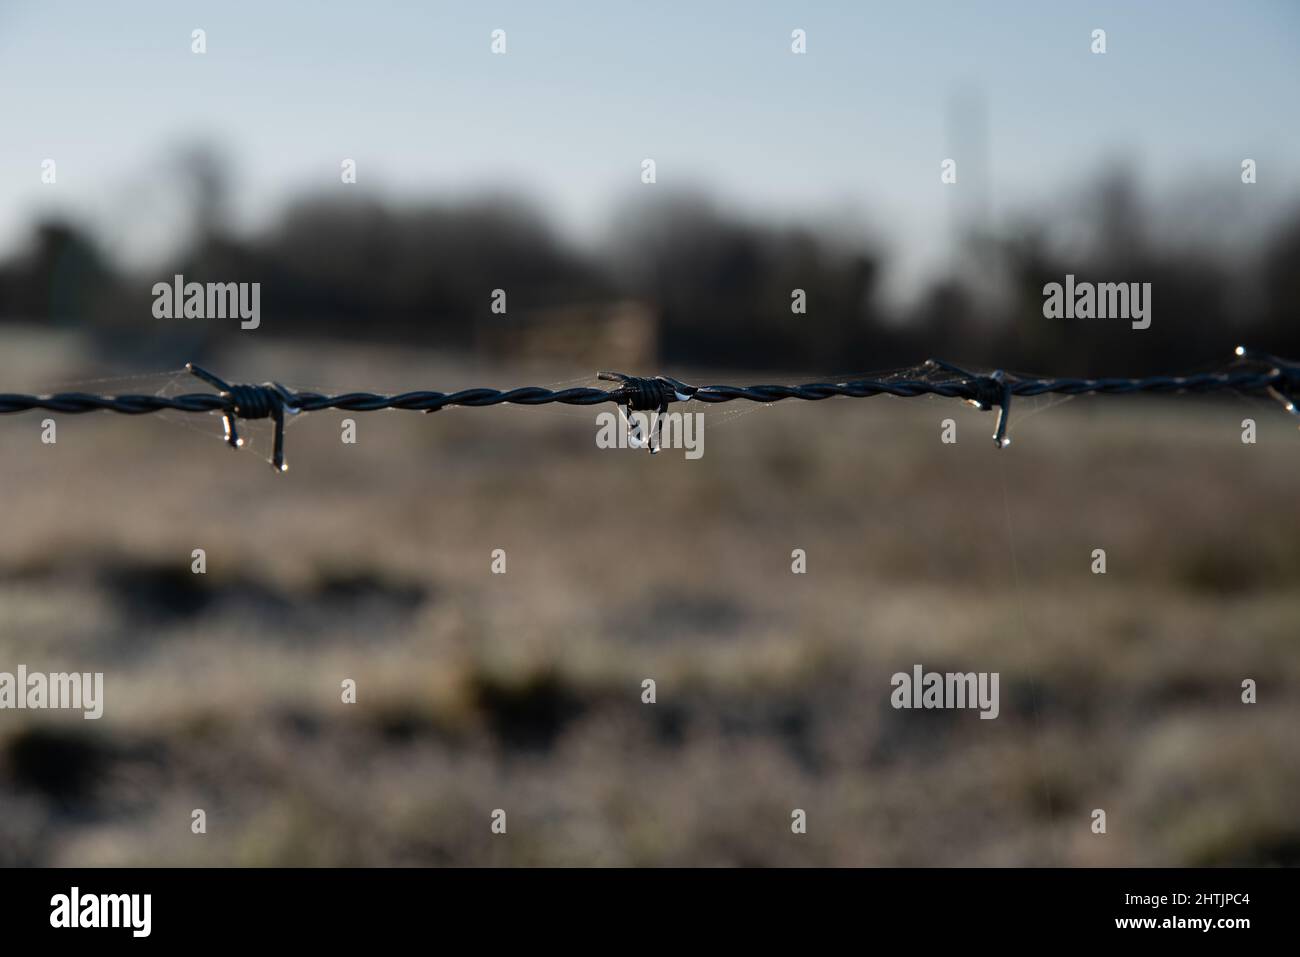 Barbed wire close up with water drops Stock Photo